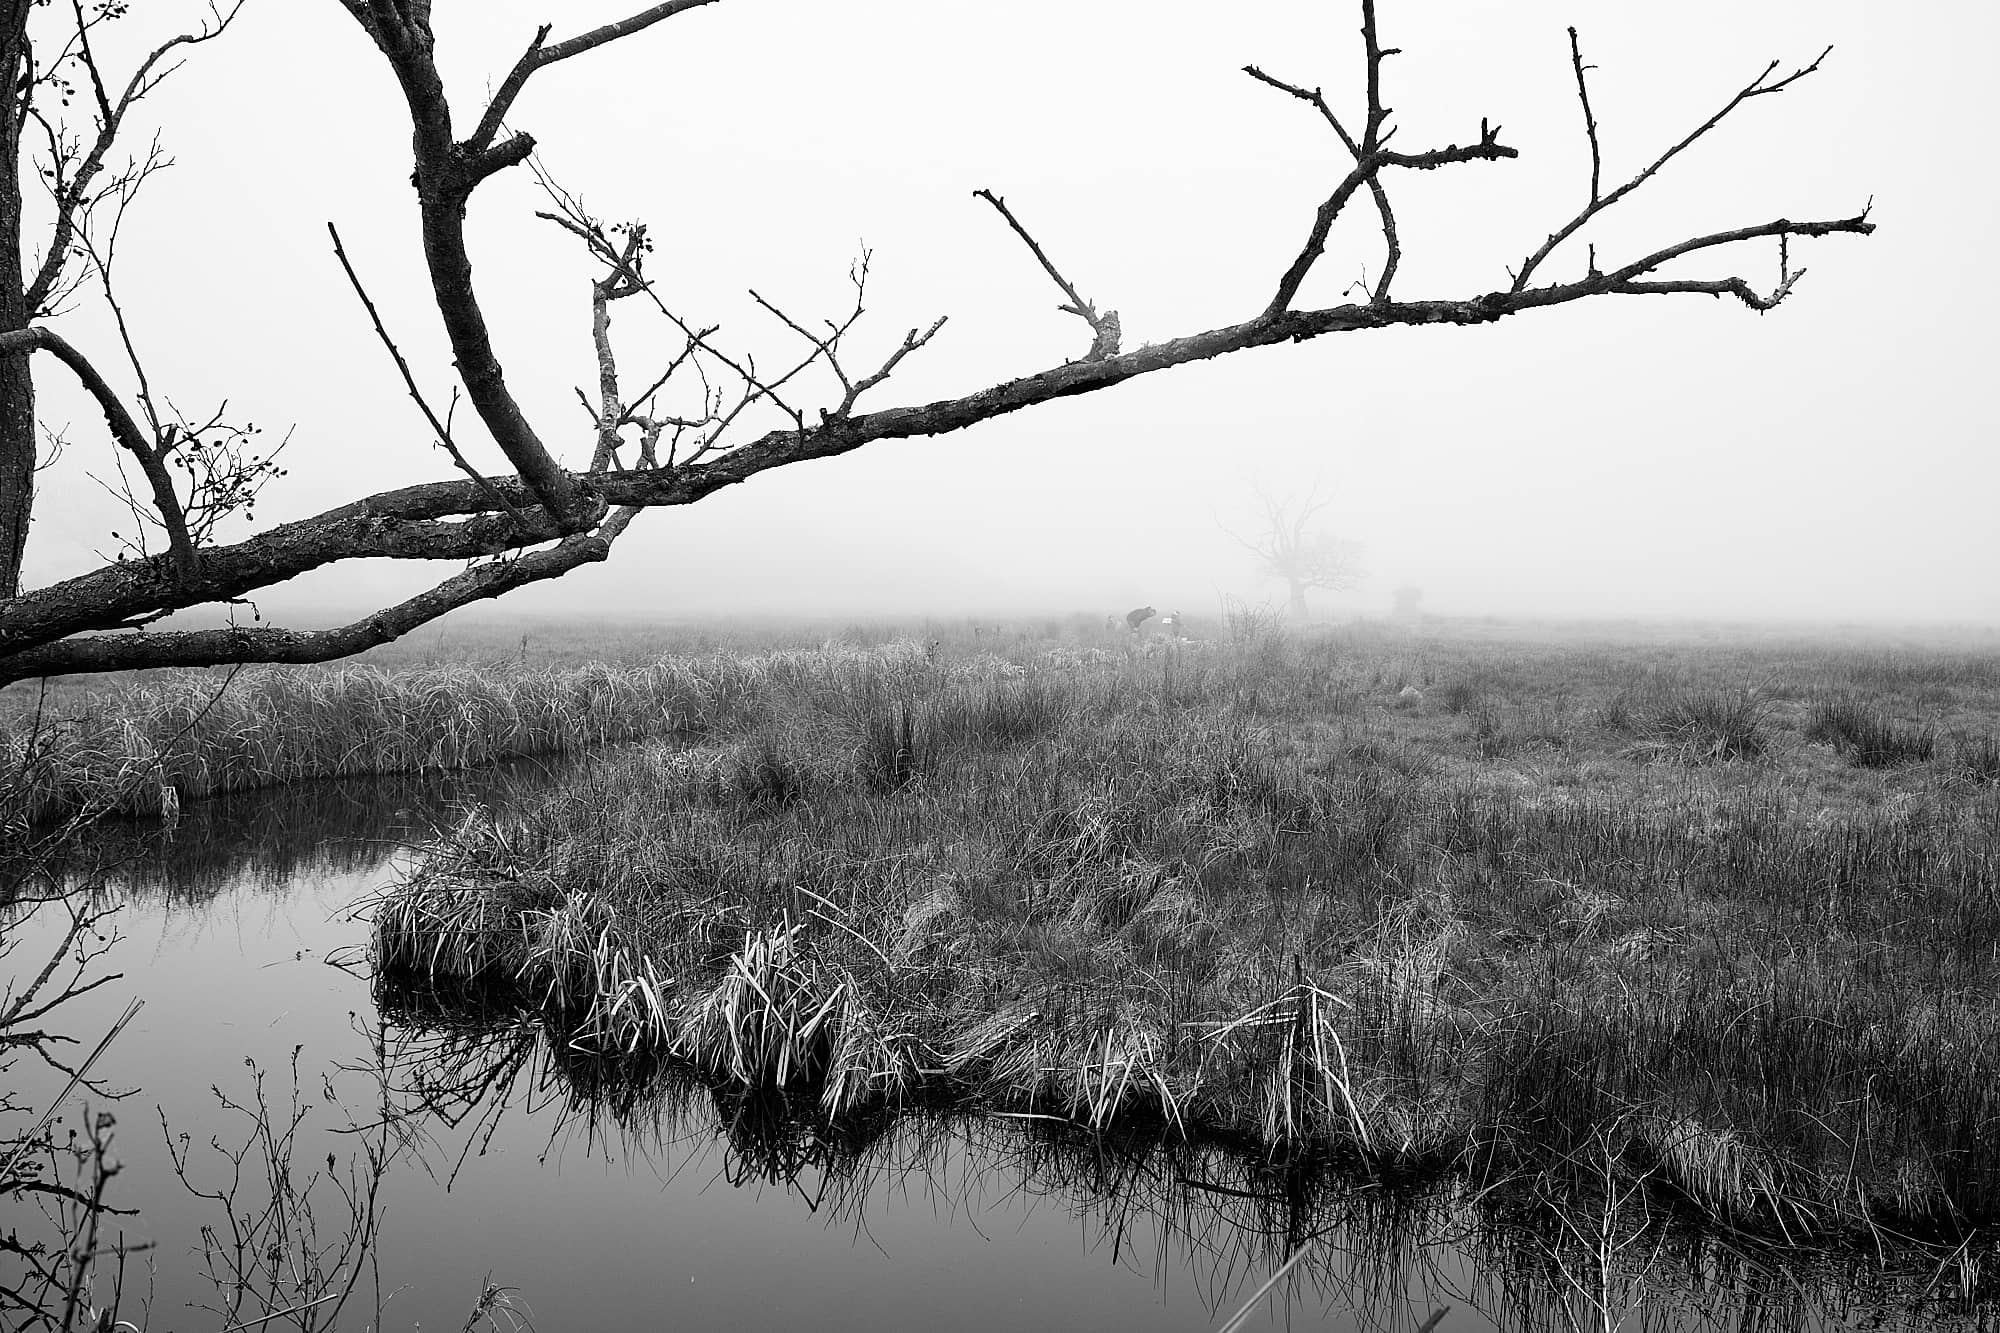 bare tree branch against the grey sky before a bend in a waterway